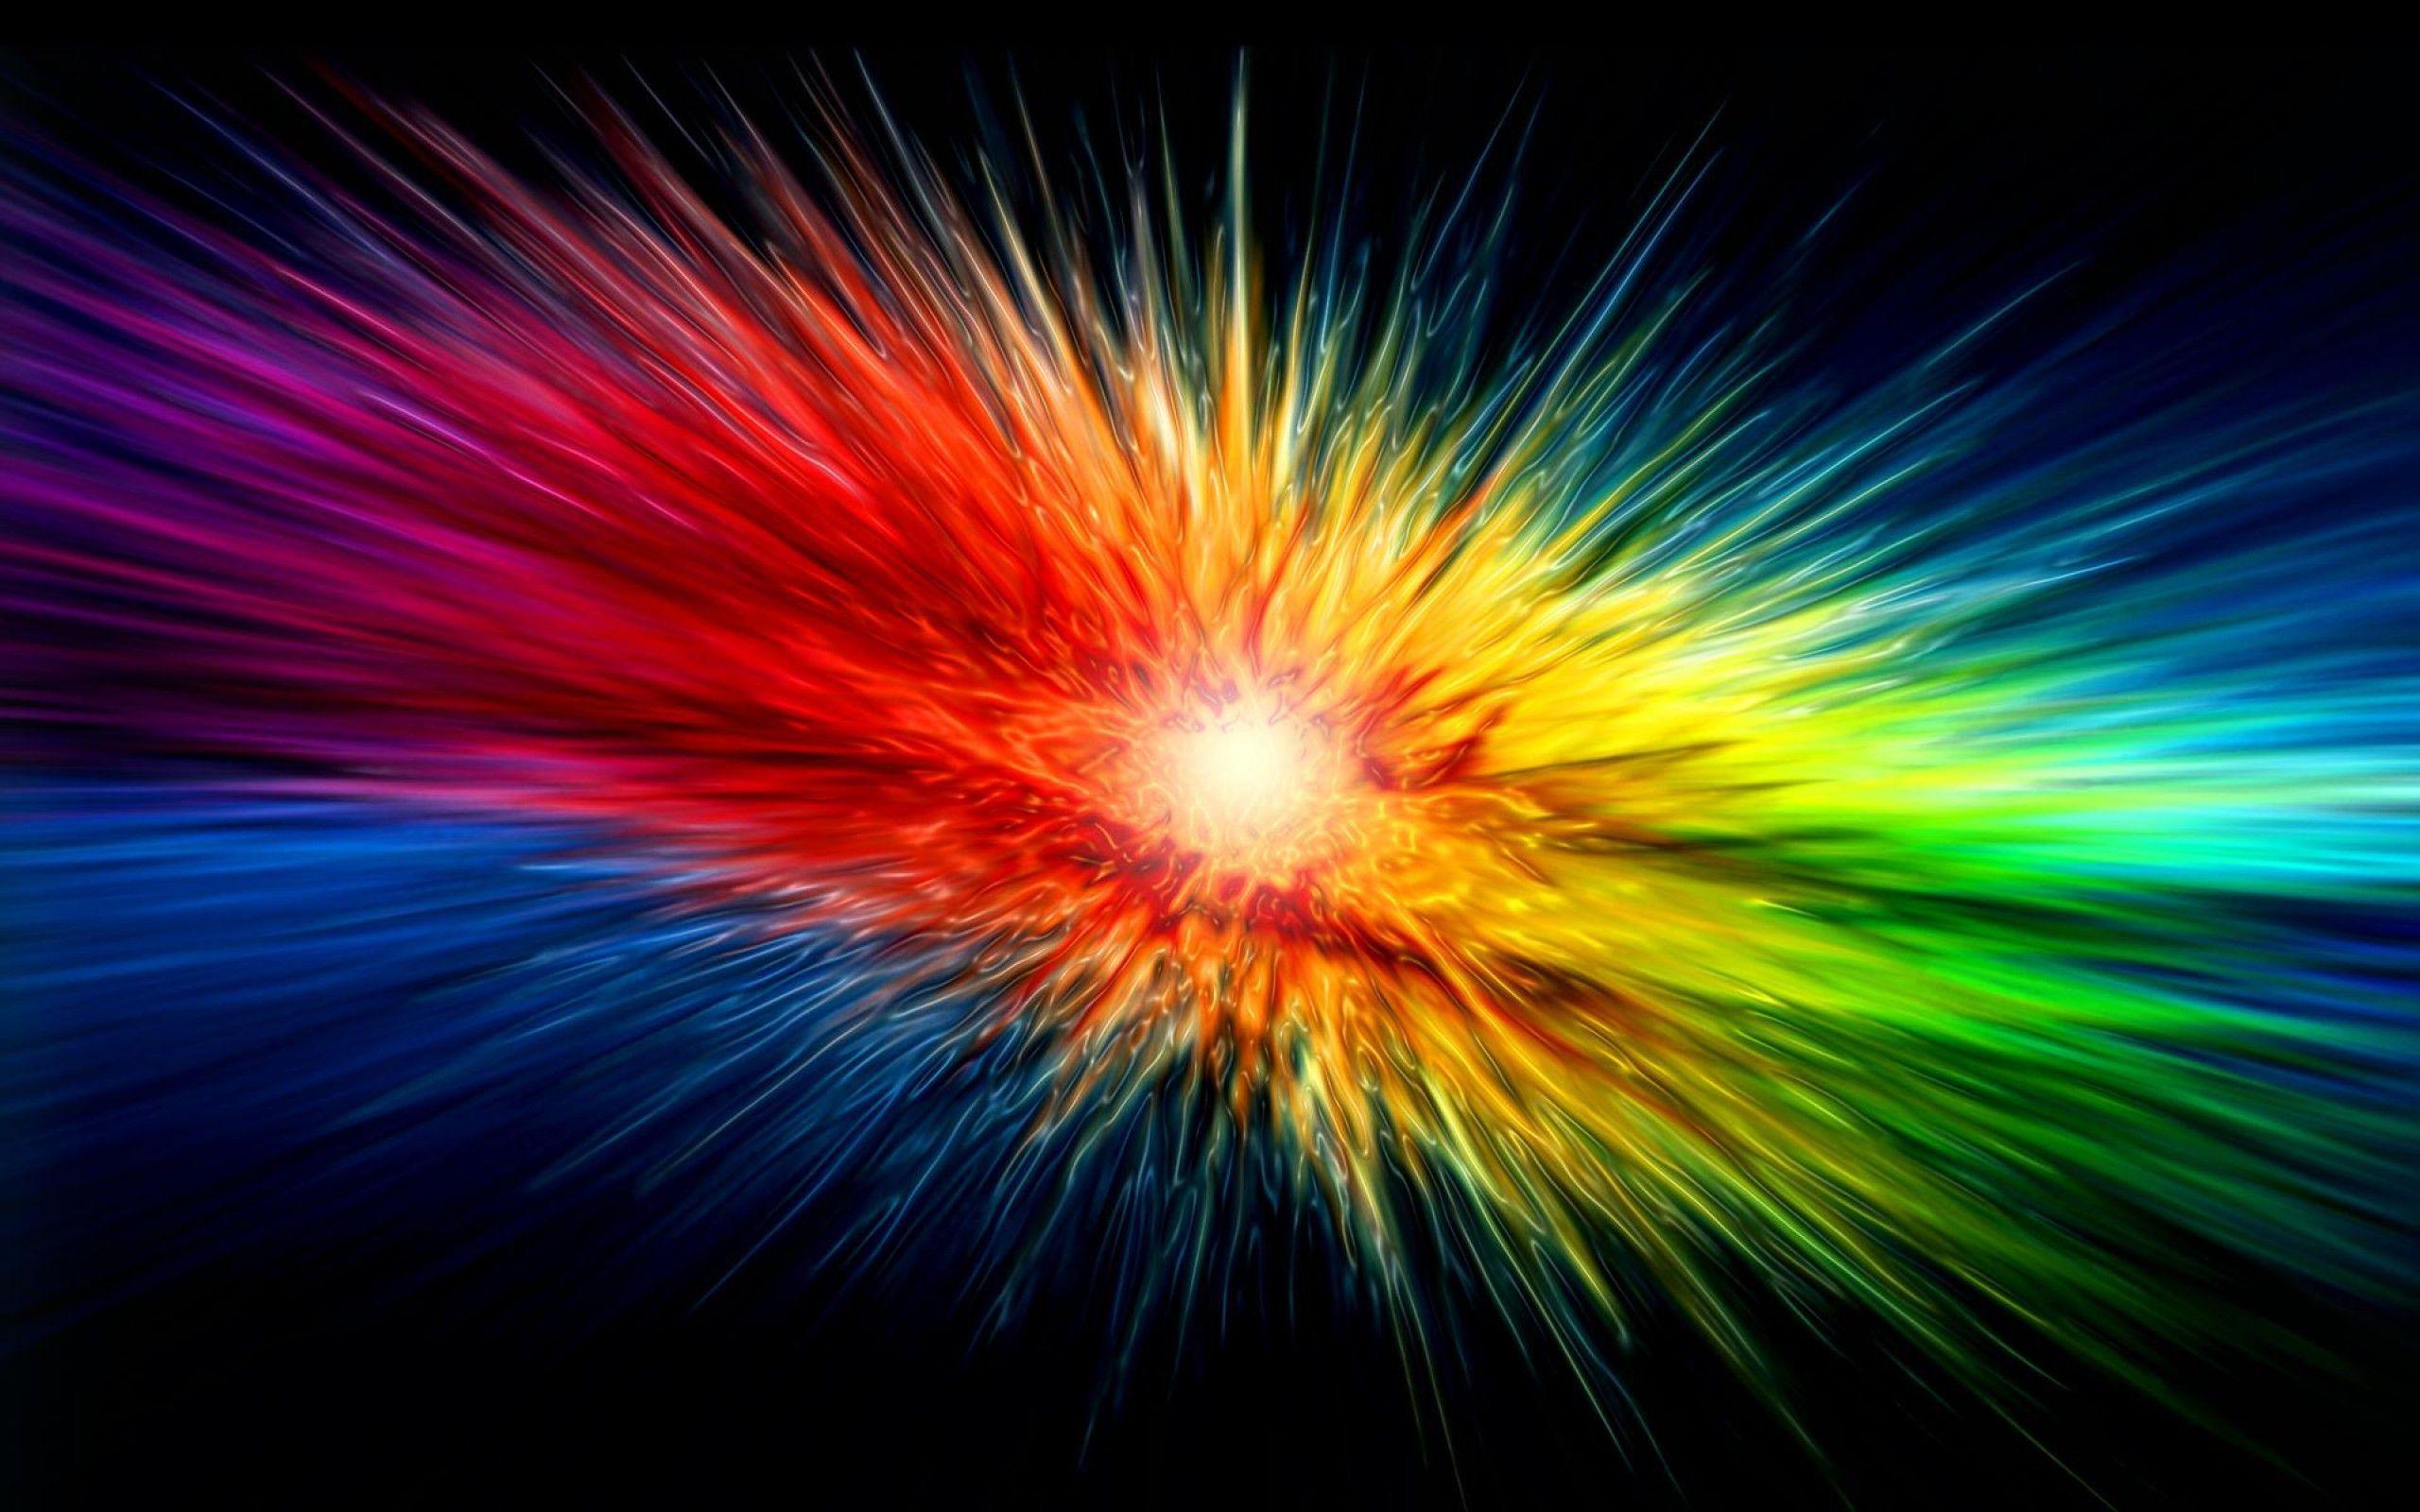 Abstract Colorful Colorful Explosion Wallpaper. Resner